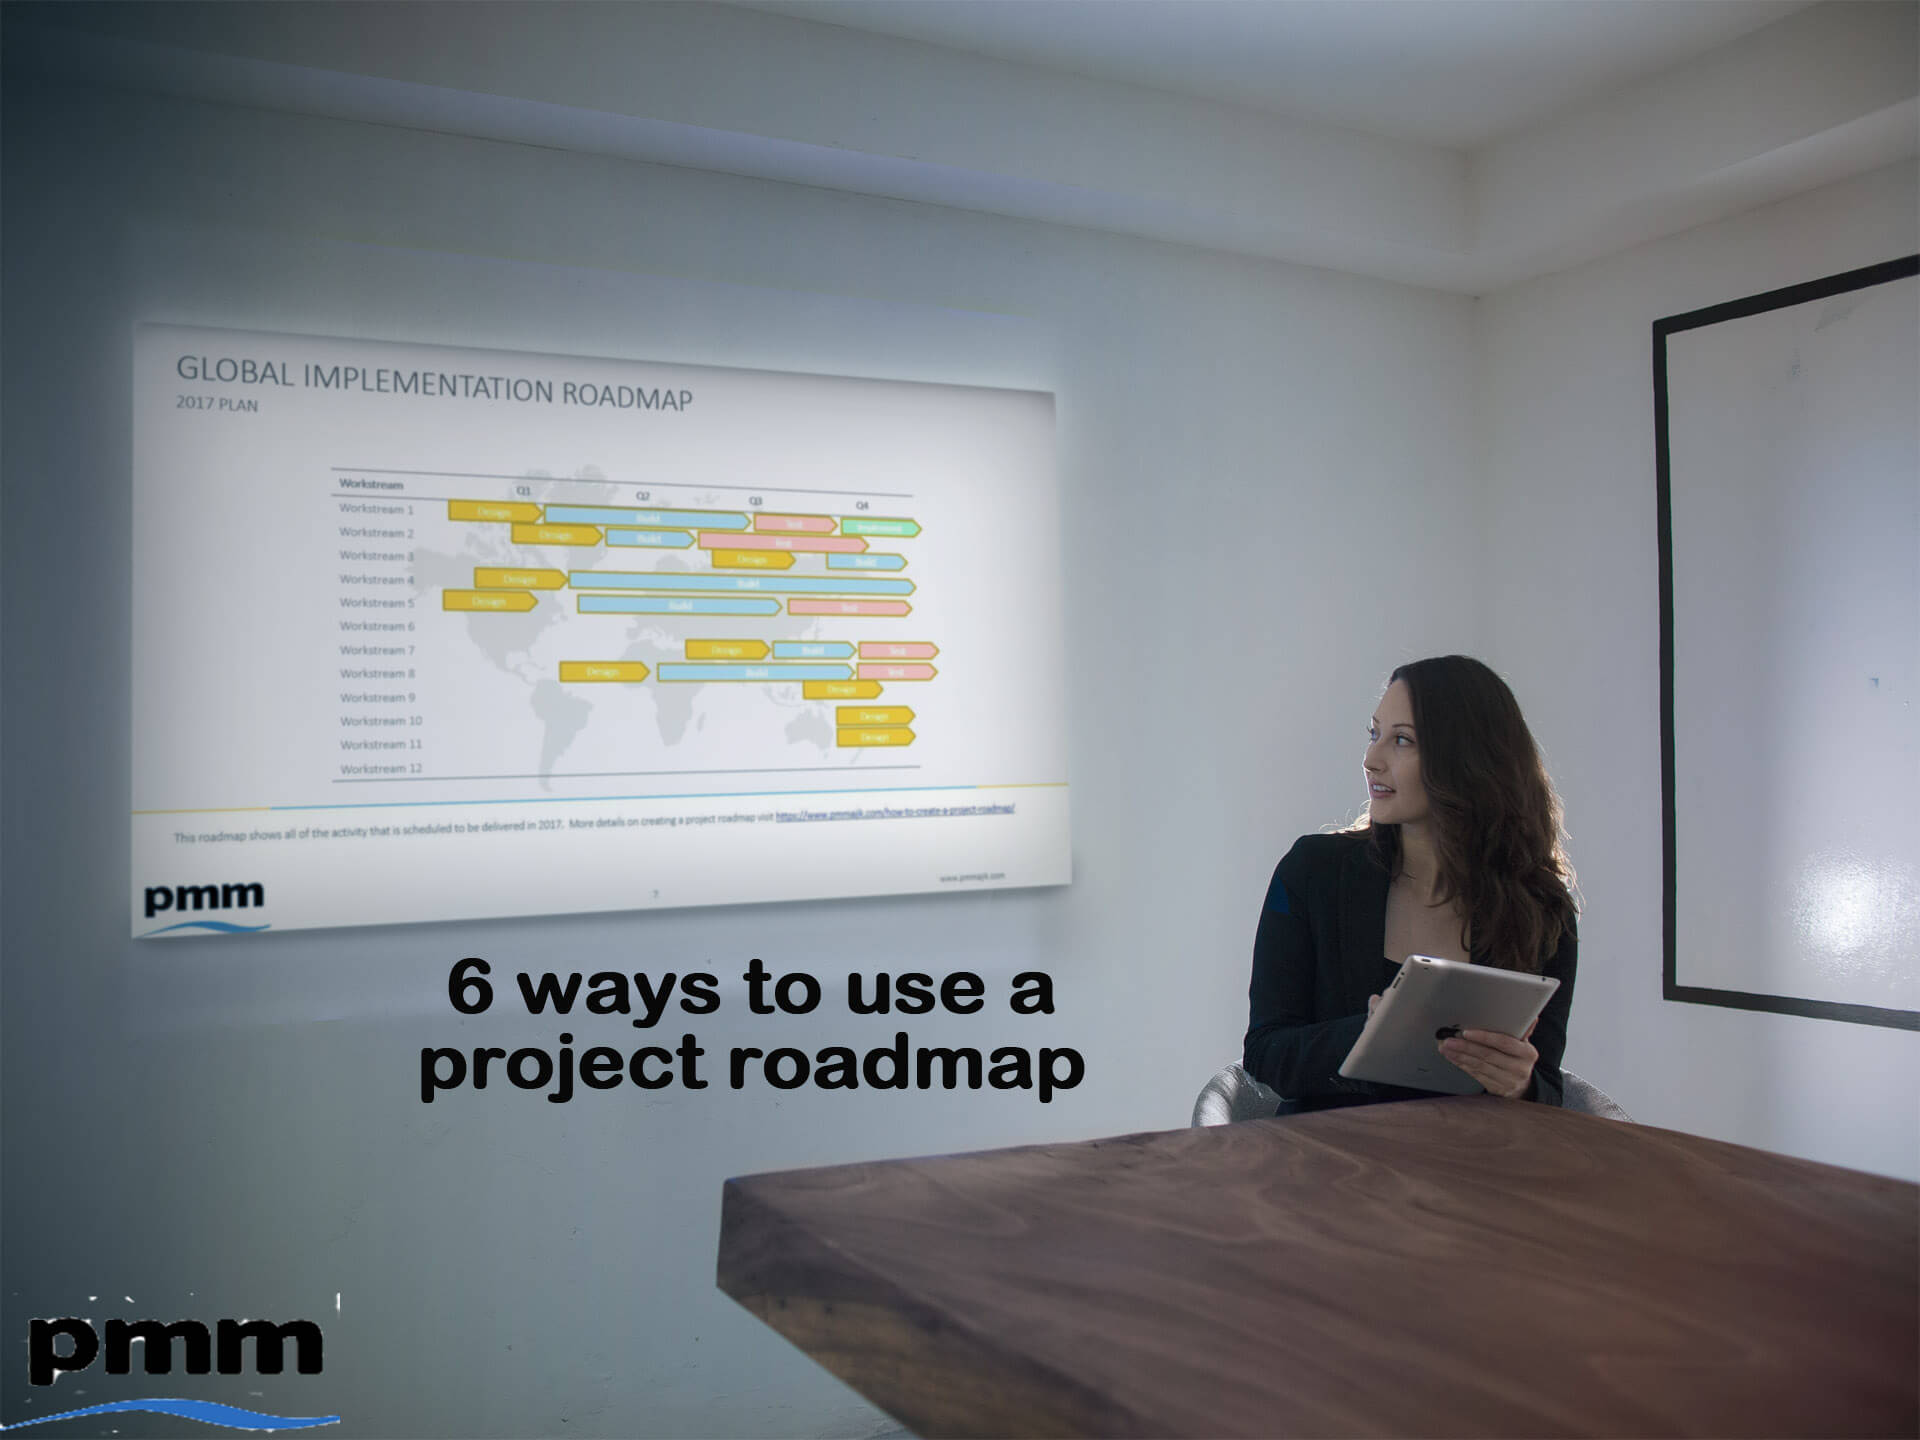 6 ways to use a project roadmap